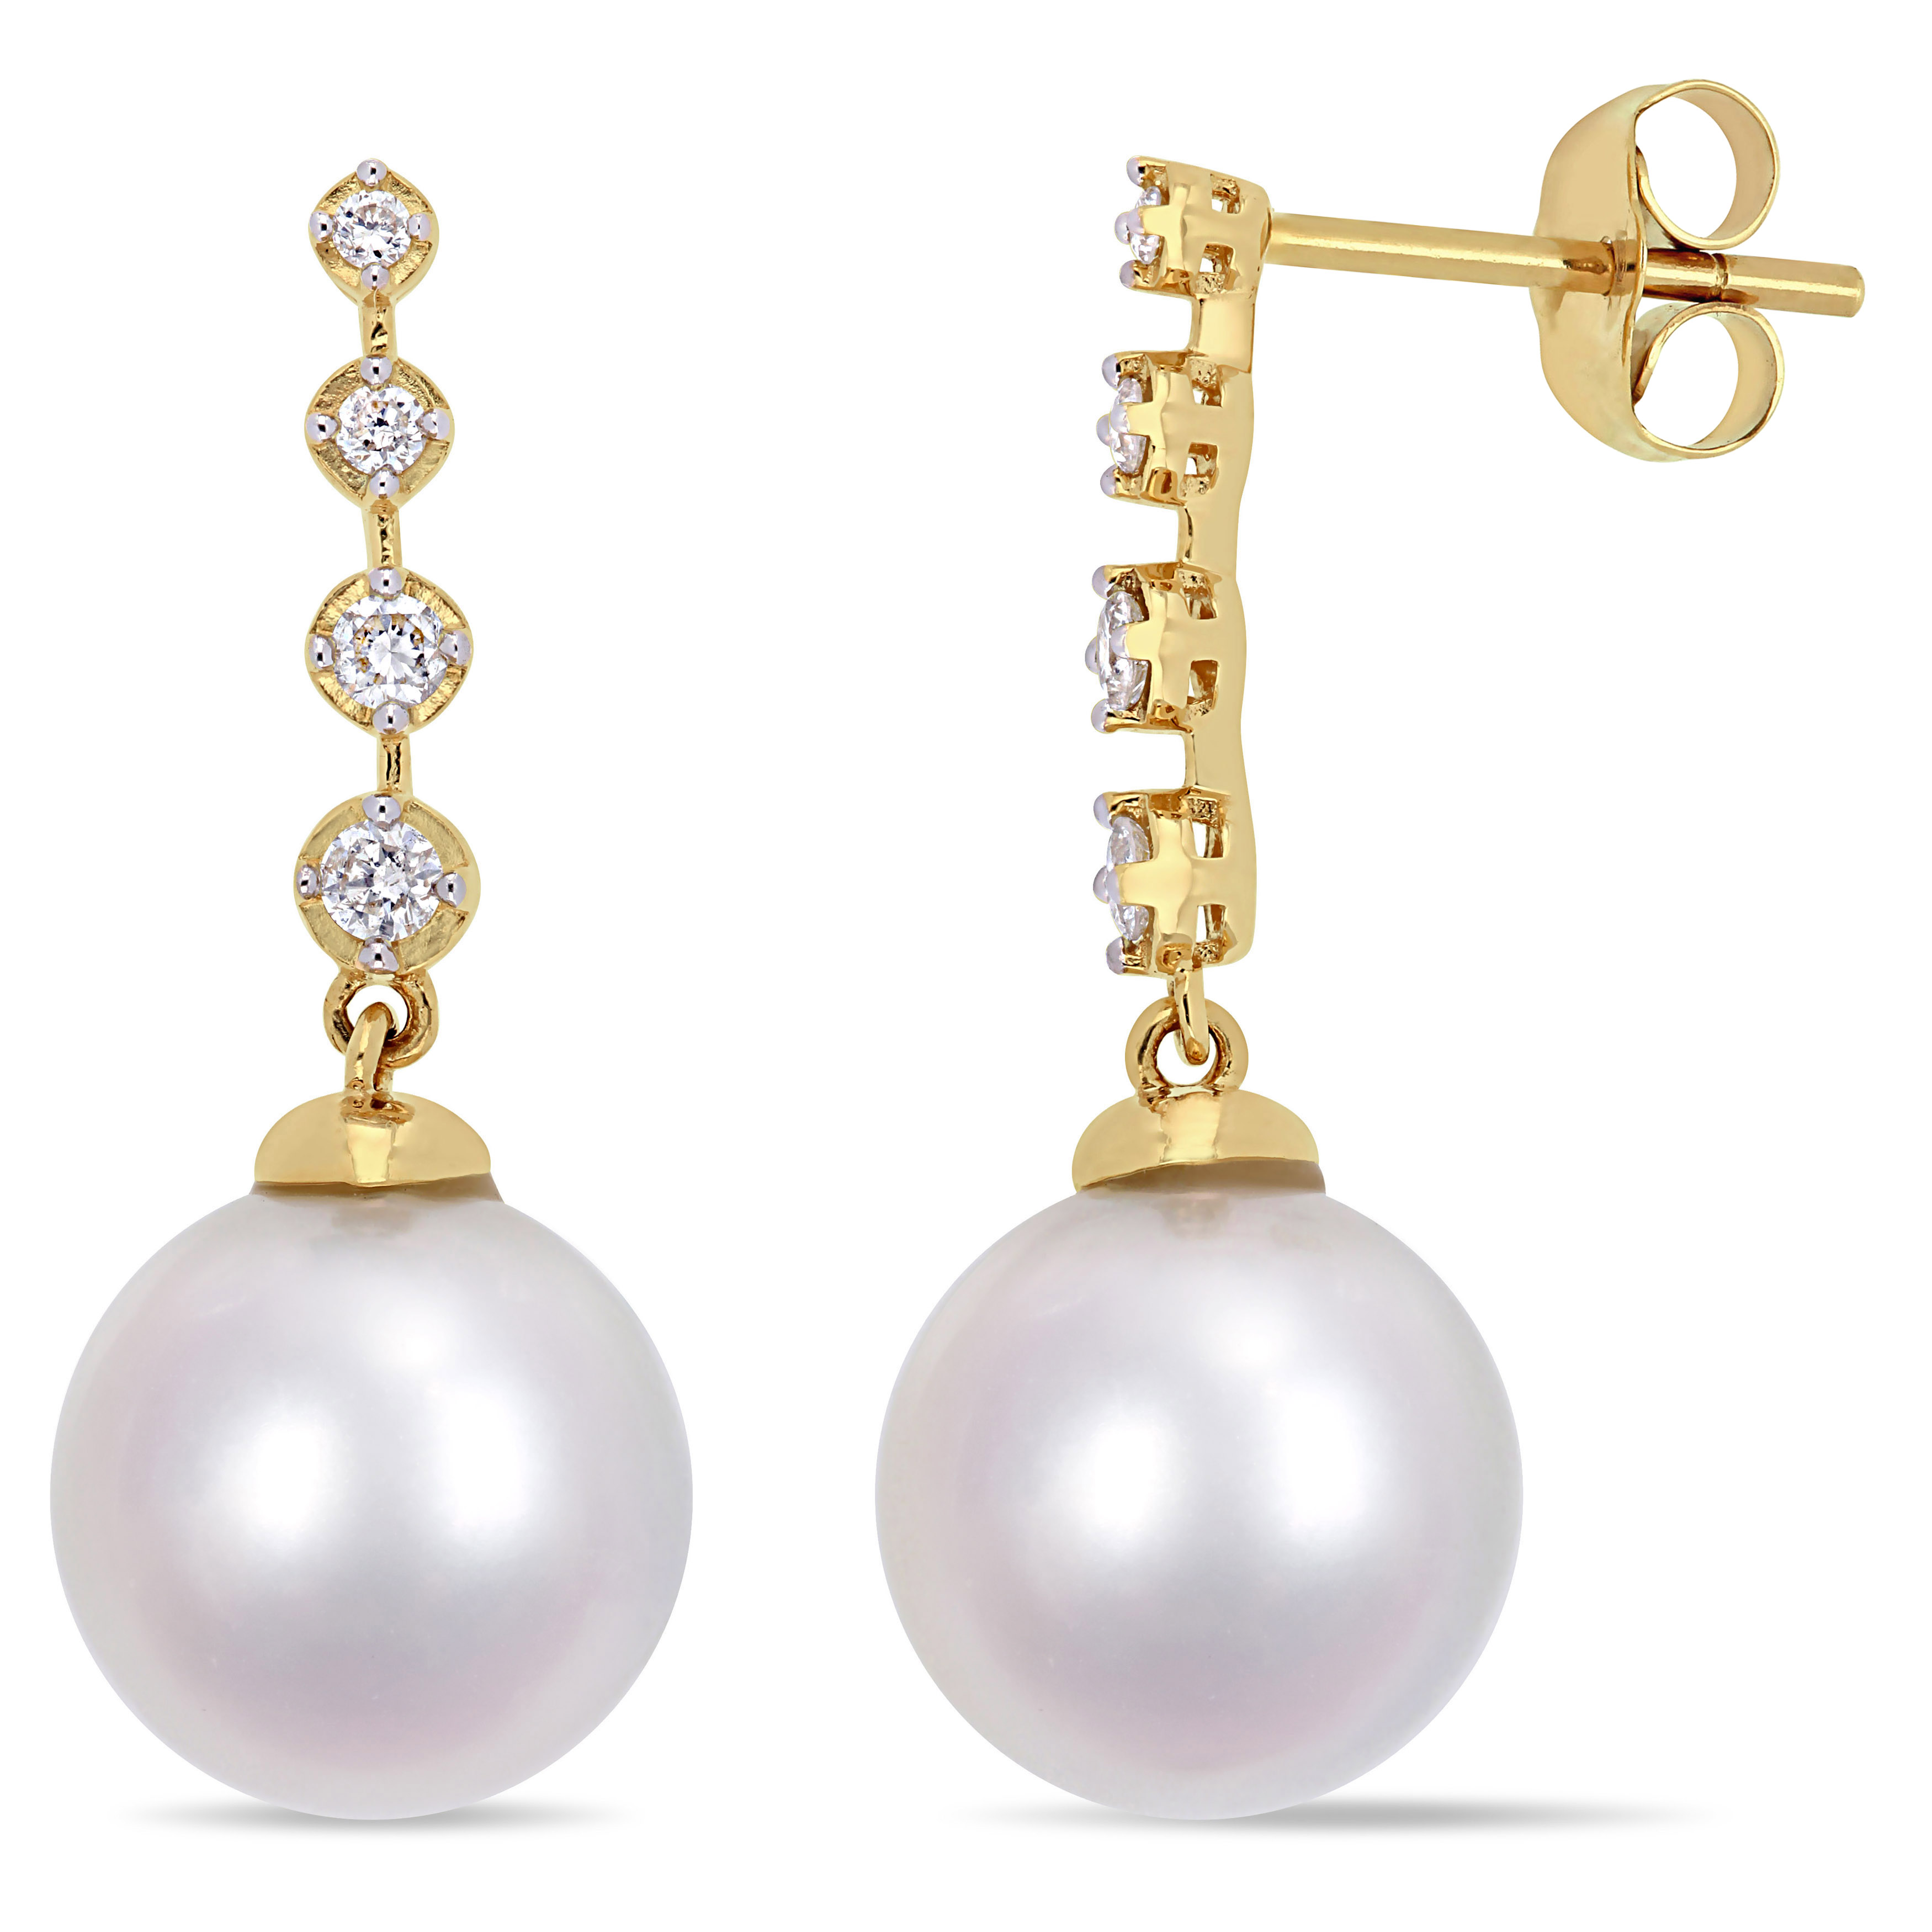 10 - 10.5 MM South Sea Cultured Pearl and 1/6 CT TW Diamond Dangle Earrings in 14k Yellow Gold